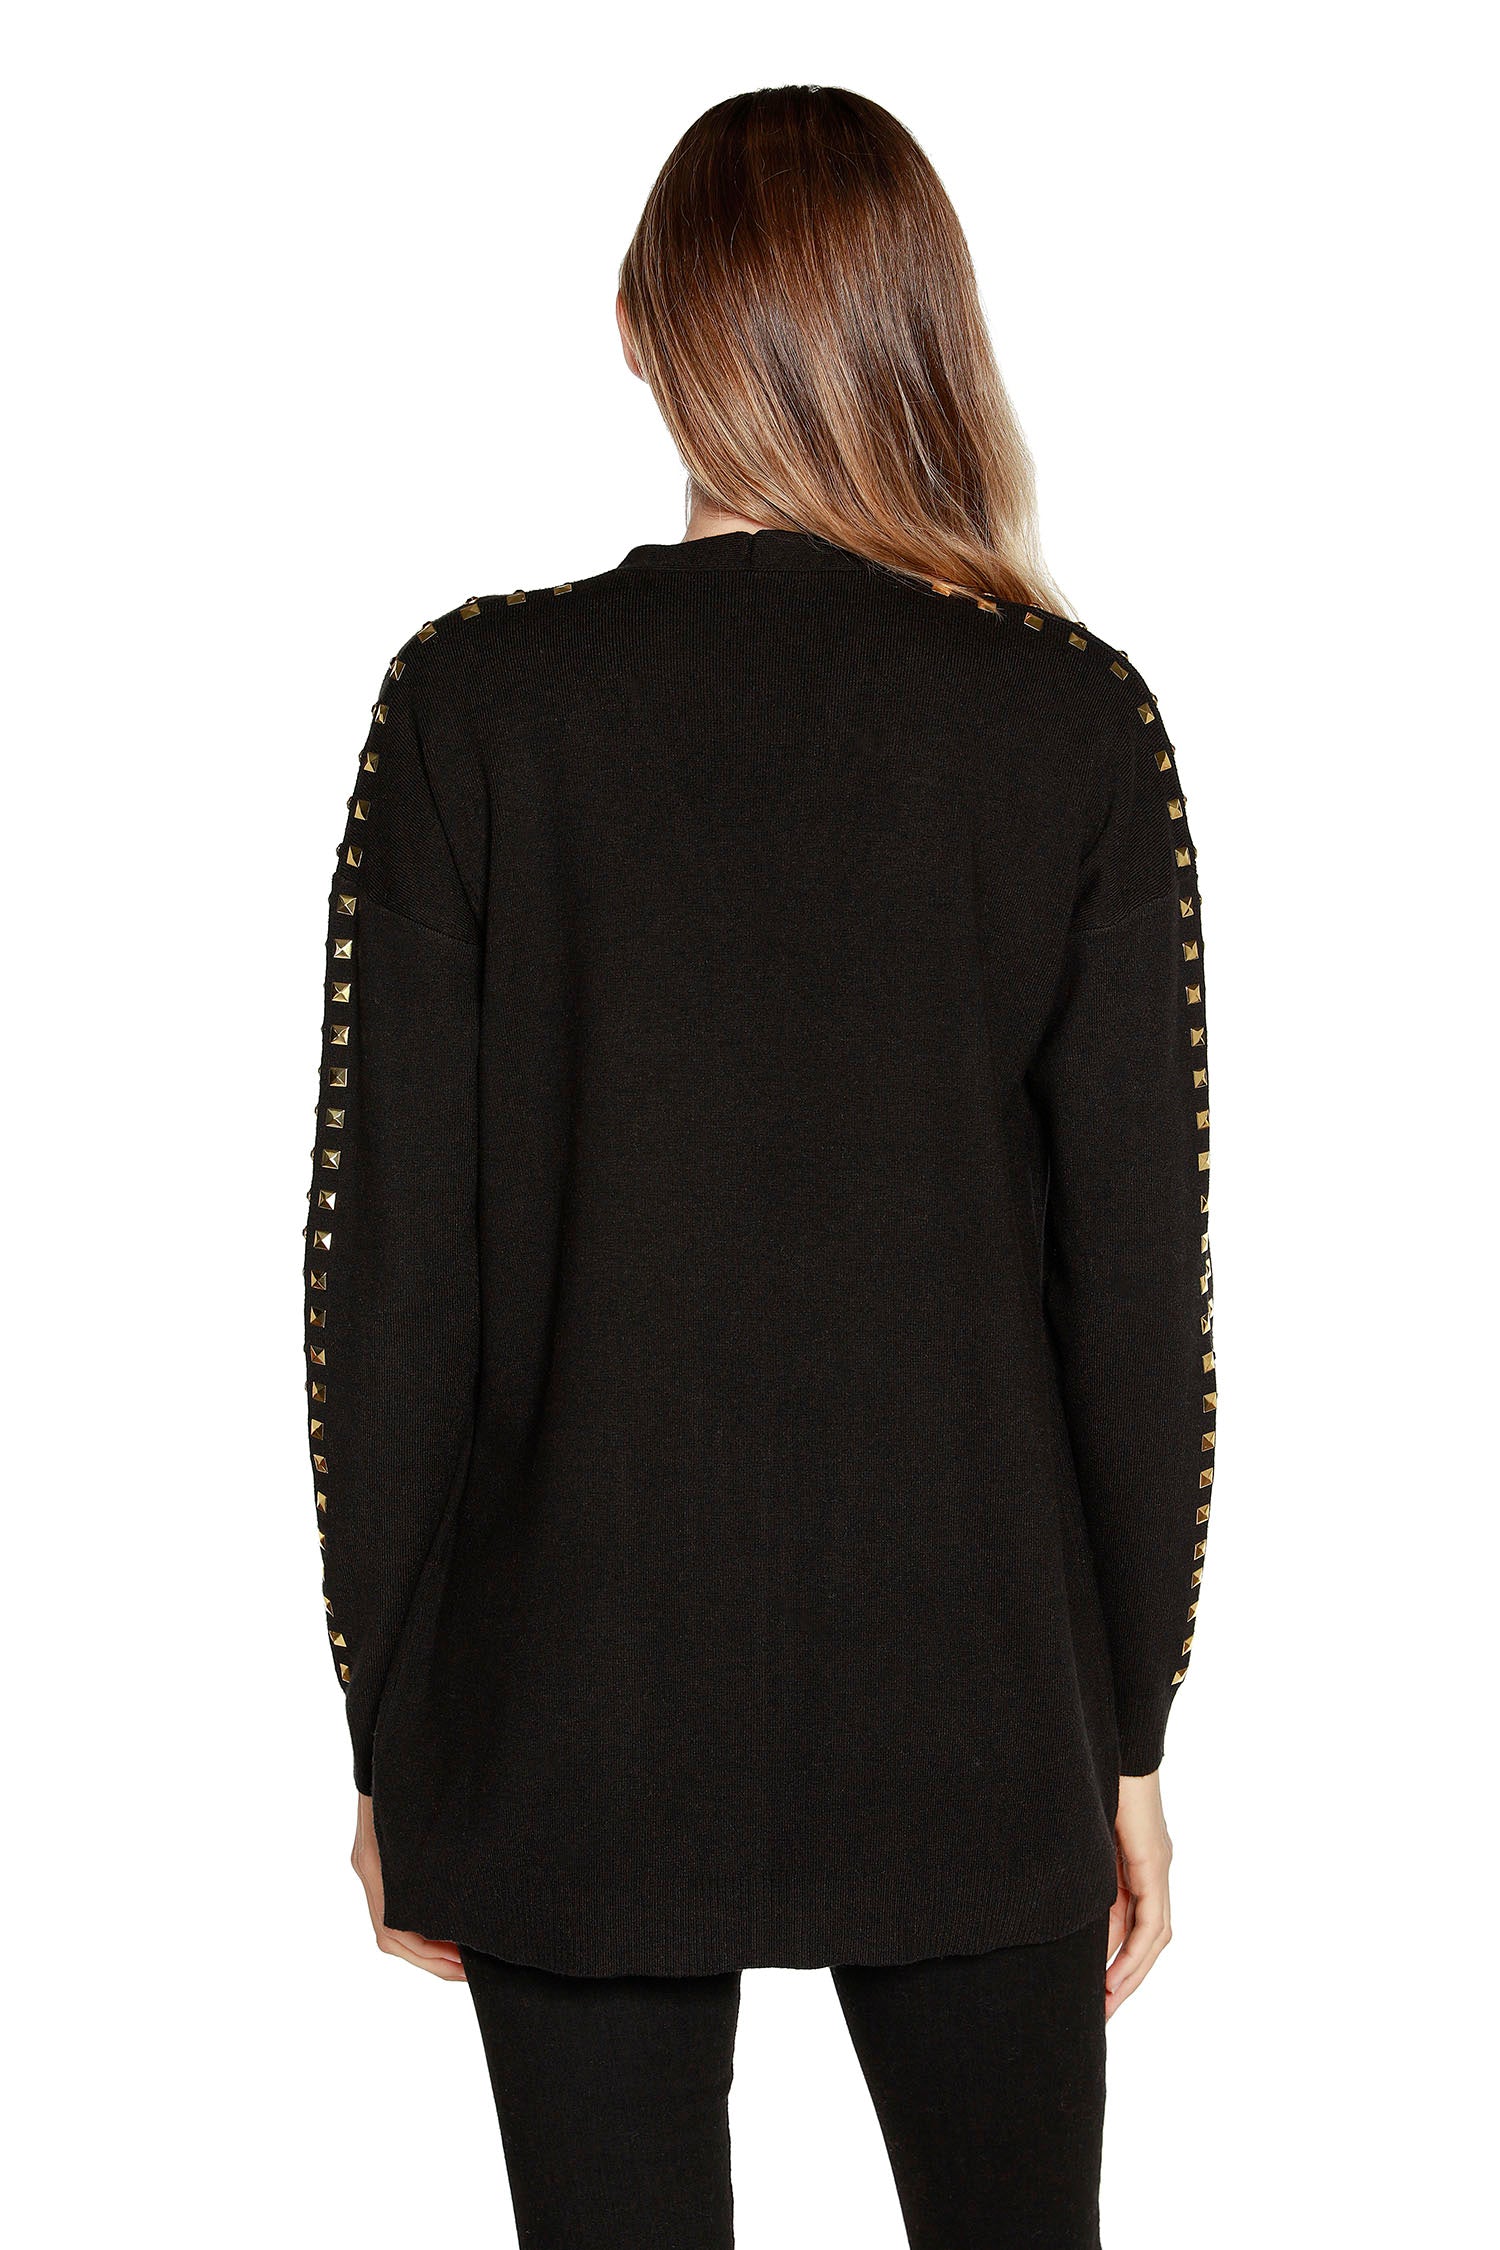 Women’s Lightweight Open Front Cardigan with Rhinestones, Studs and Patch Pockets